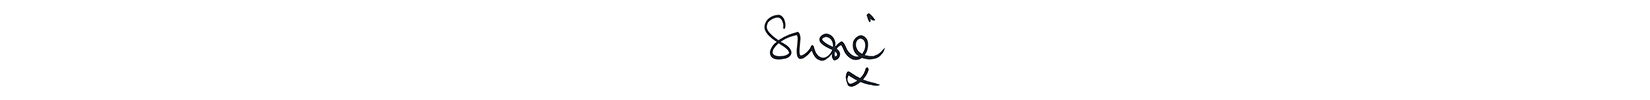 Susie's Signature Signed With a Kiss